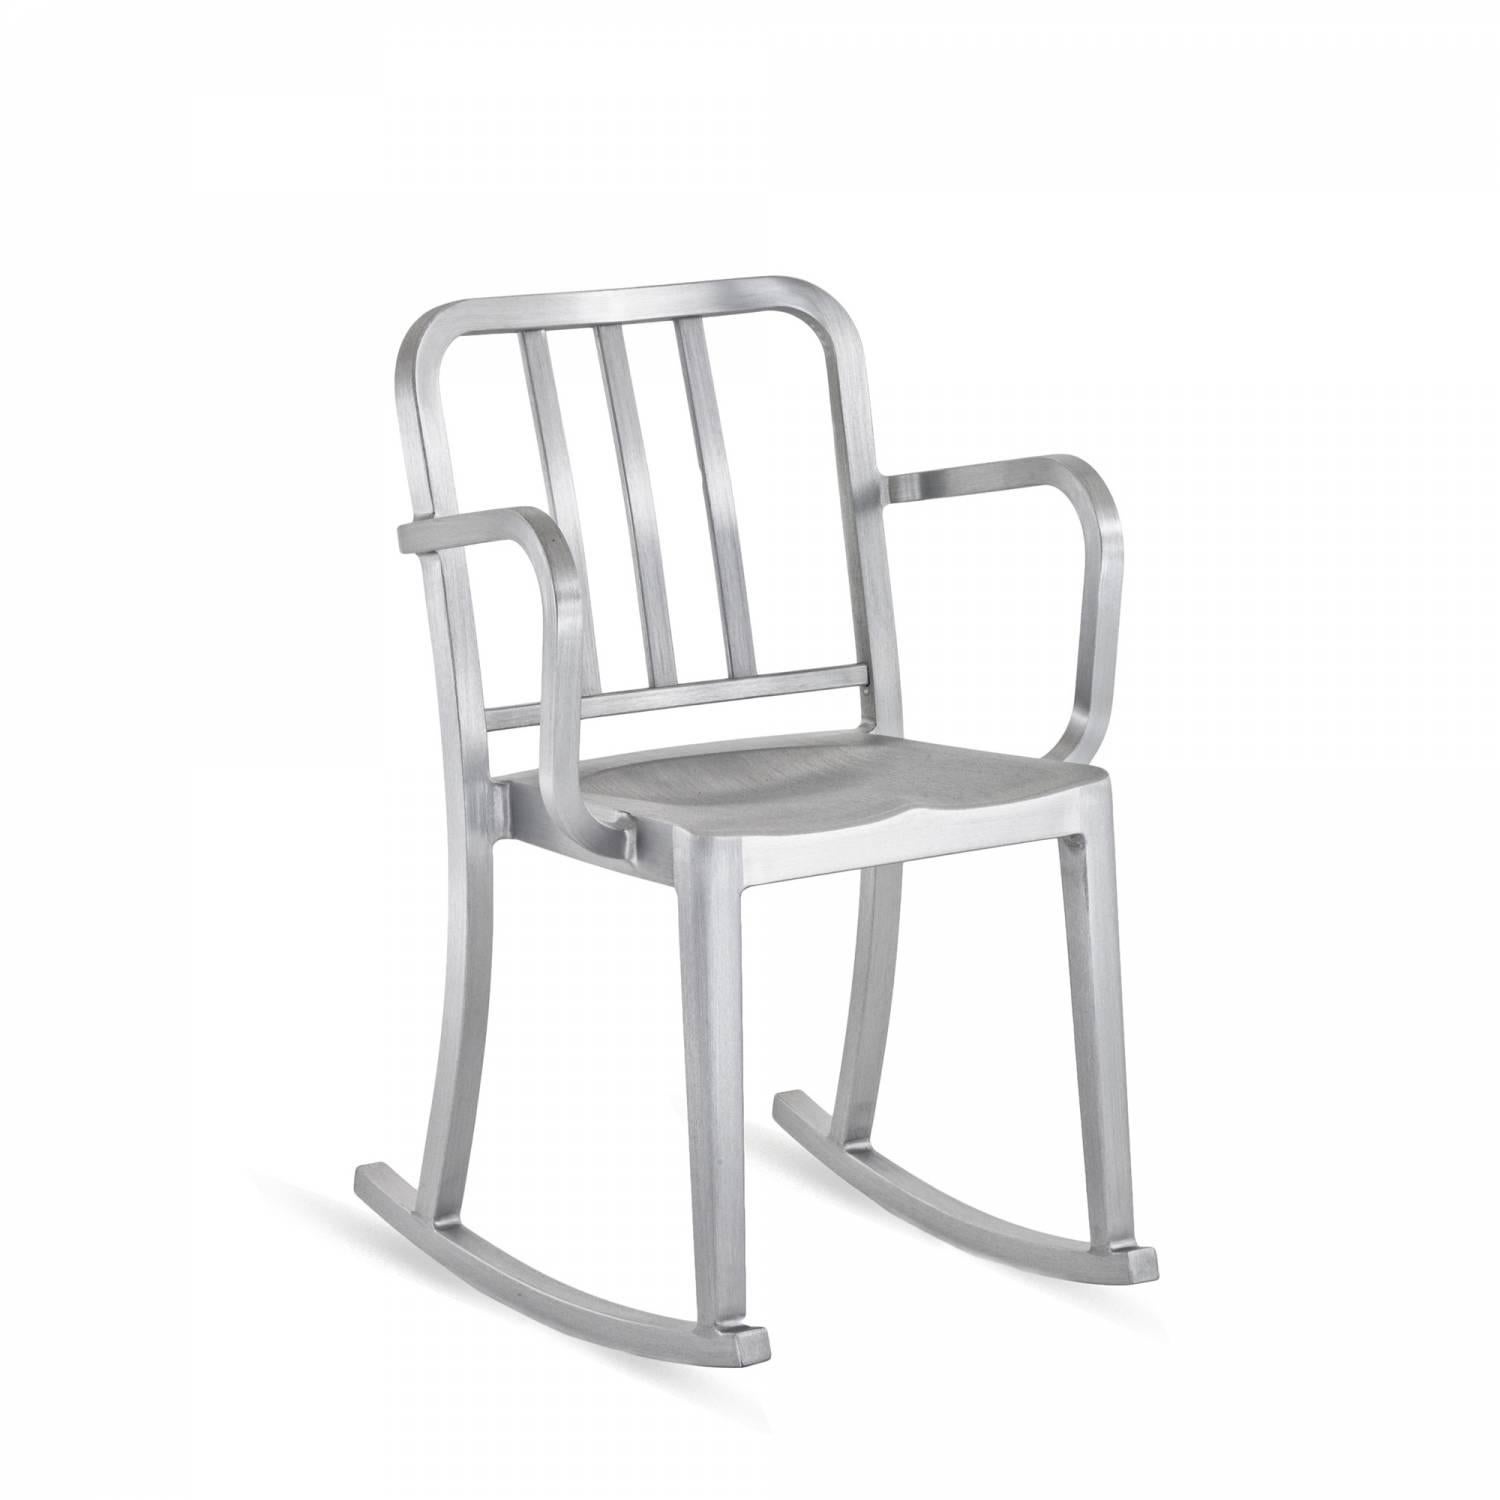 Heritage is a stacking chair designed by Philippe Starck, inspired by the original 1006 Navy. The rocking version was designed for the world famous Bon restaurant in Paris. Intended as a “sit up” chair for working and dining, it’s a symbol of